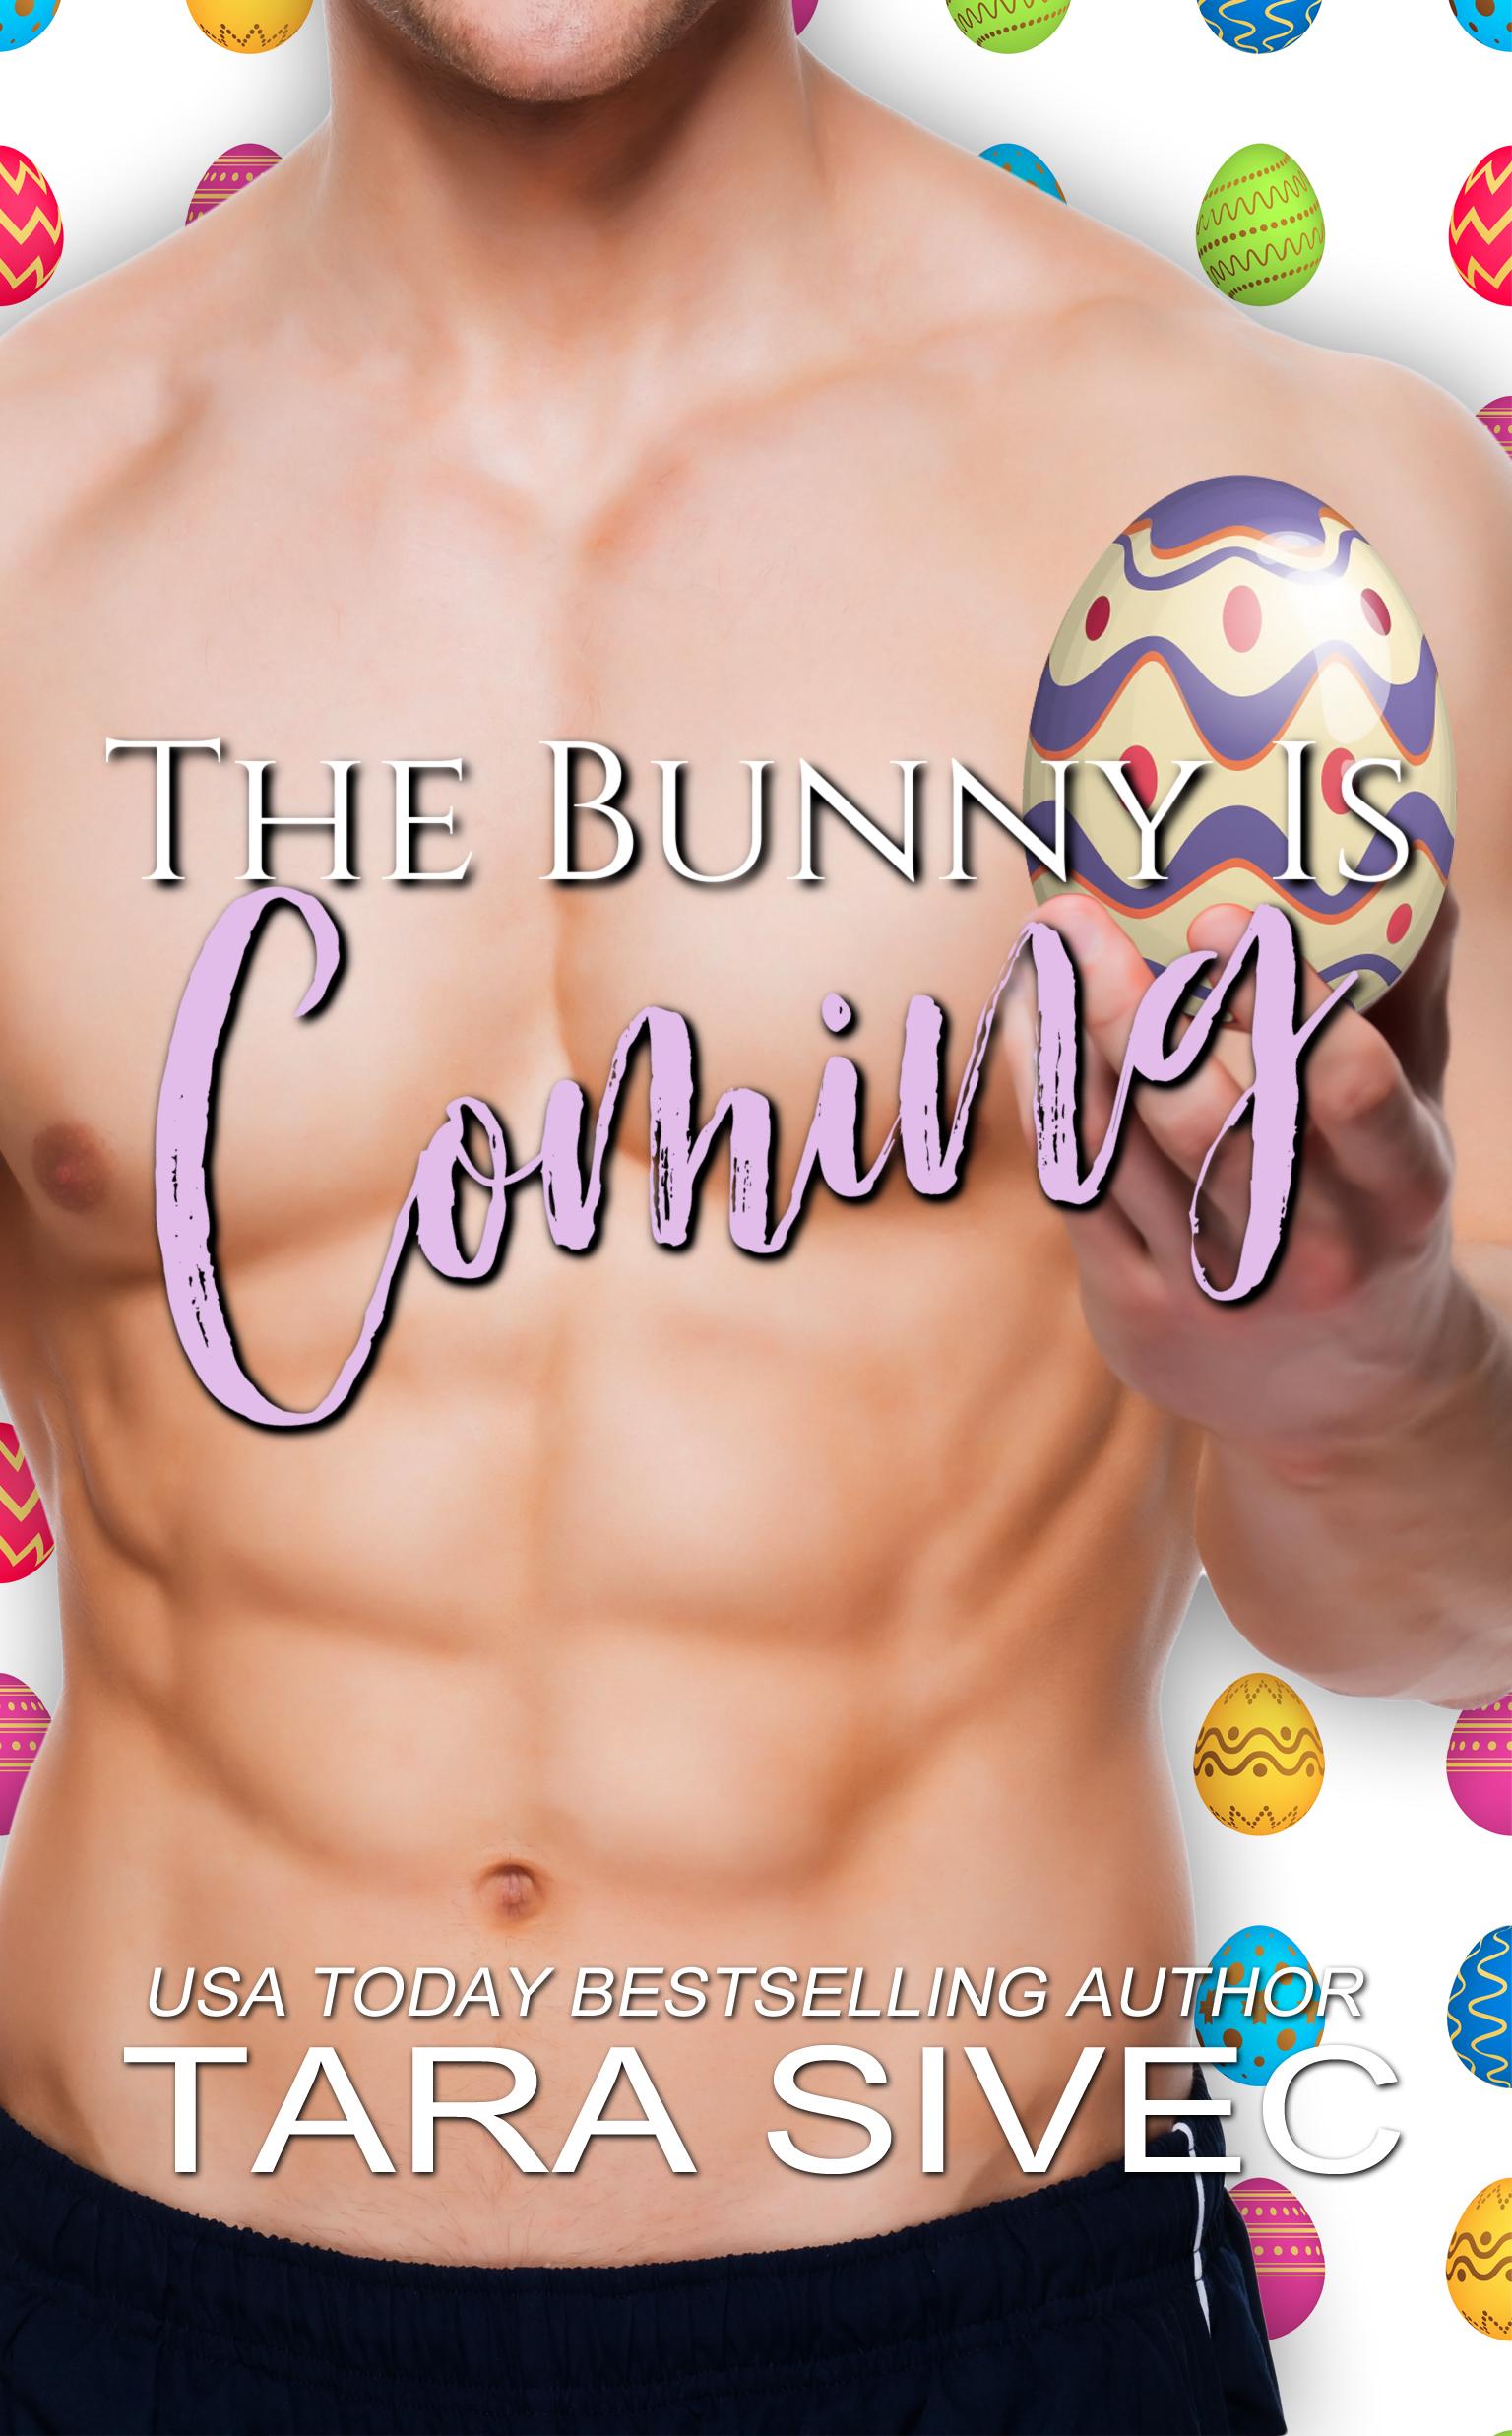 The Bunny is Coming